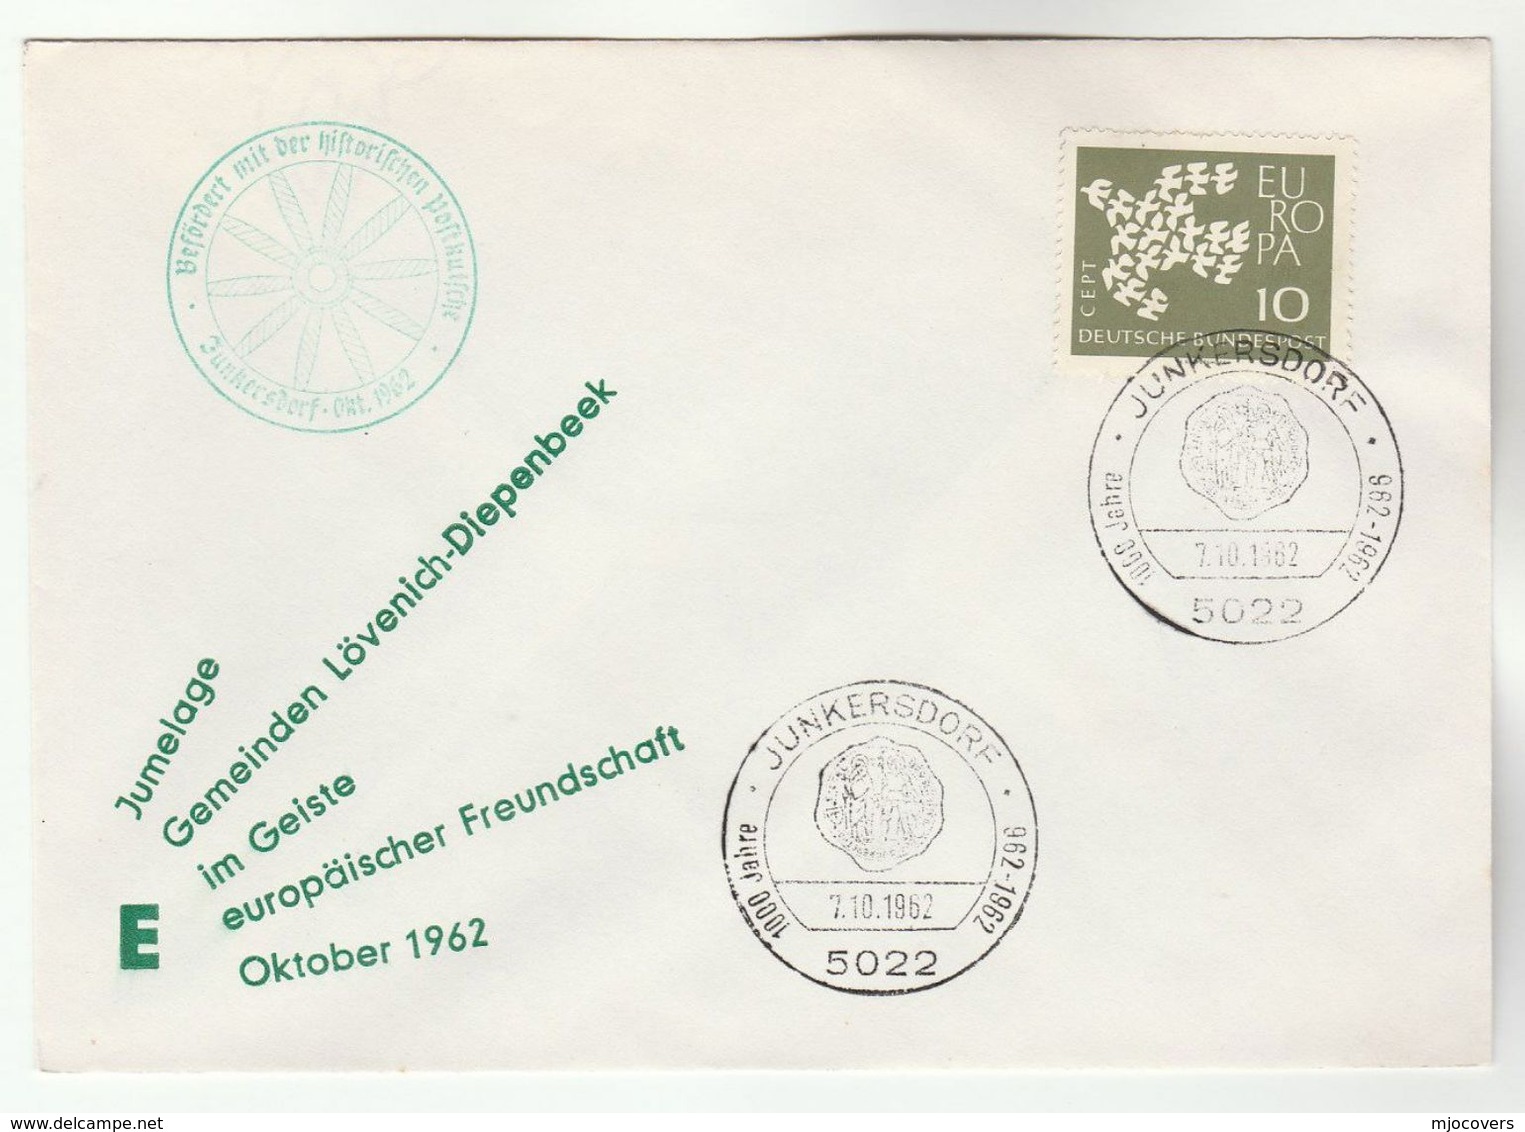 1962 Junkesdorf GERMANY COVER  EUROPA Stamps  EVENT COVER - 1962